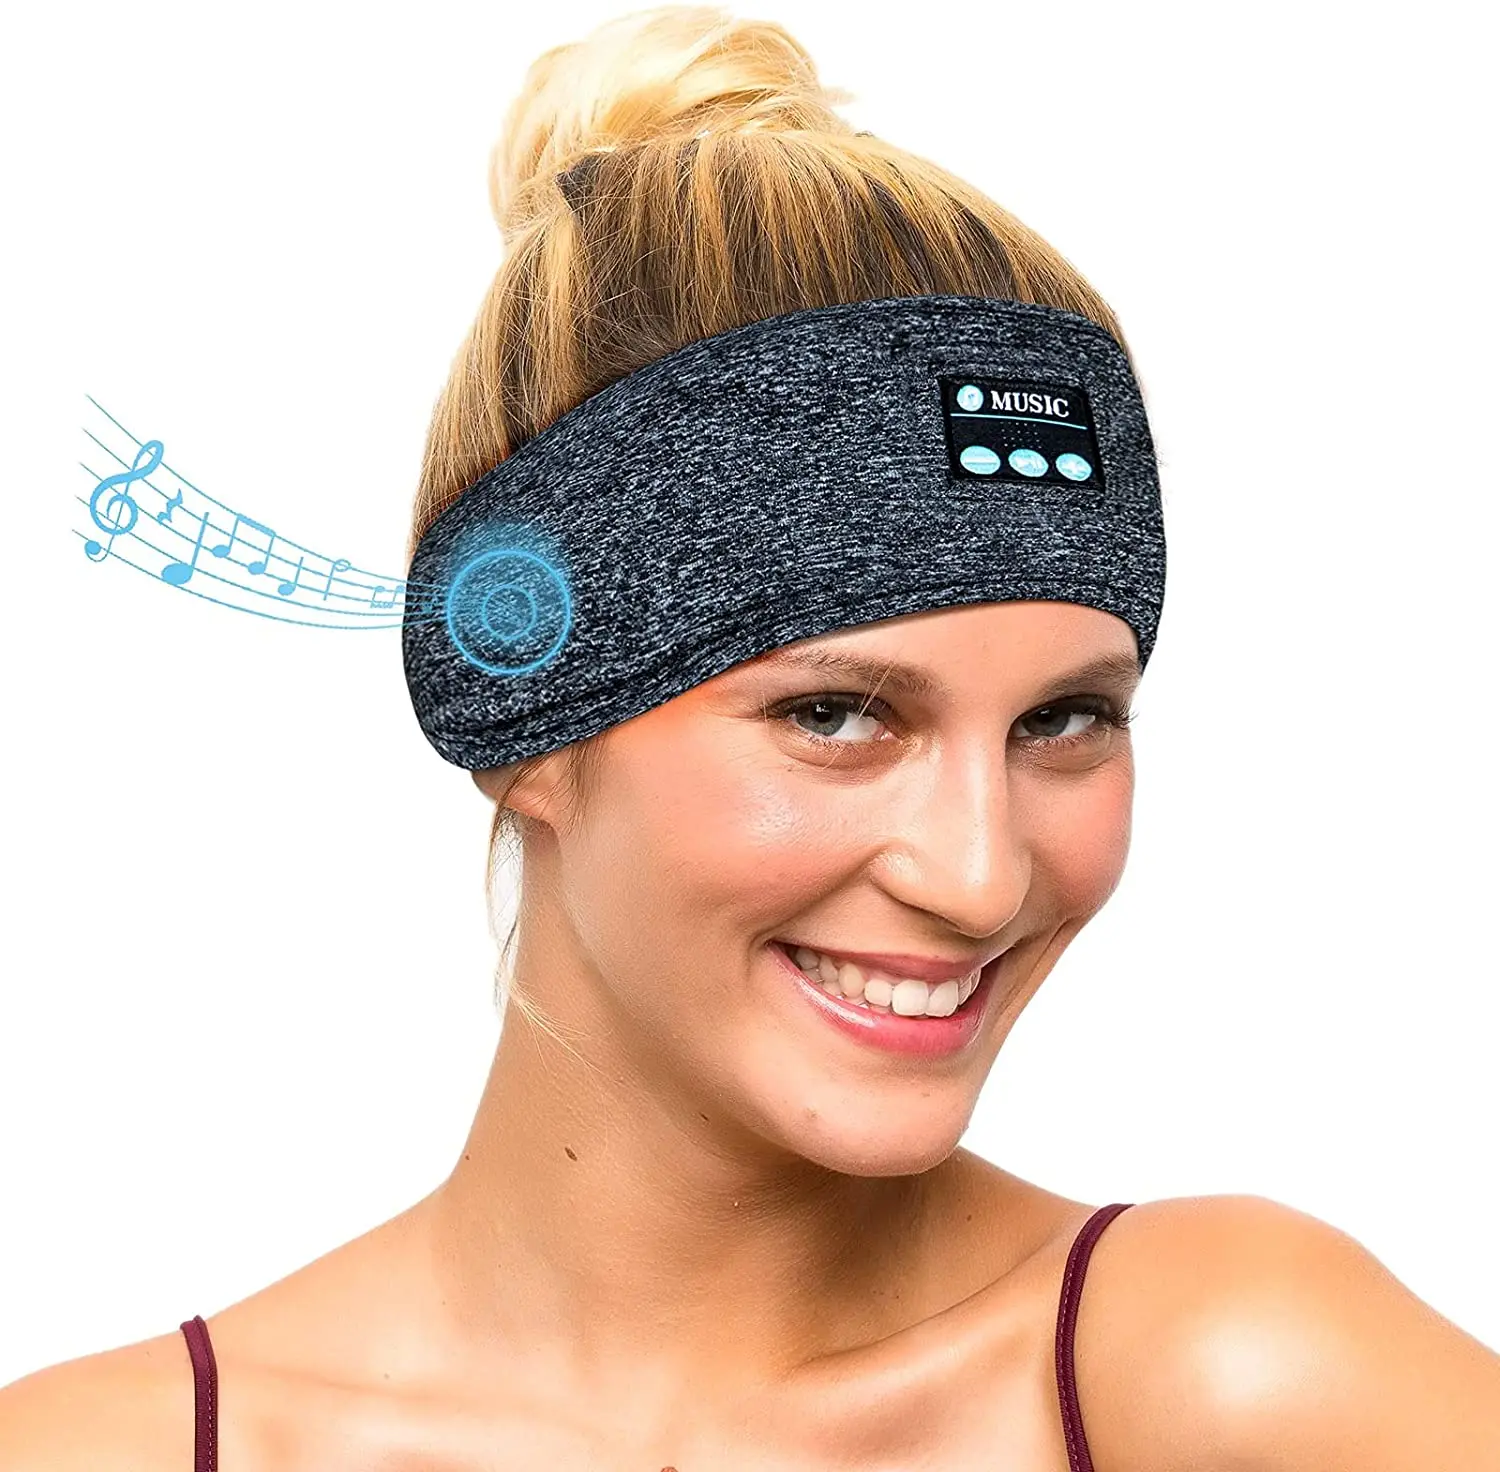 

Blue tooth Mask Headphones Wireless Sports Headband Ultra-Soft Breathable Prefect for Insomnia Meditation Yoga Workout